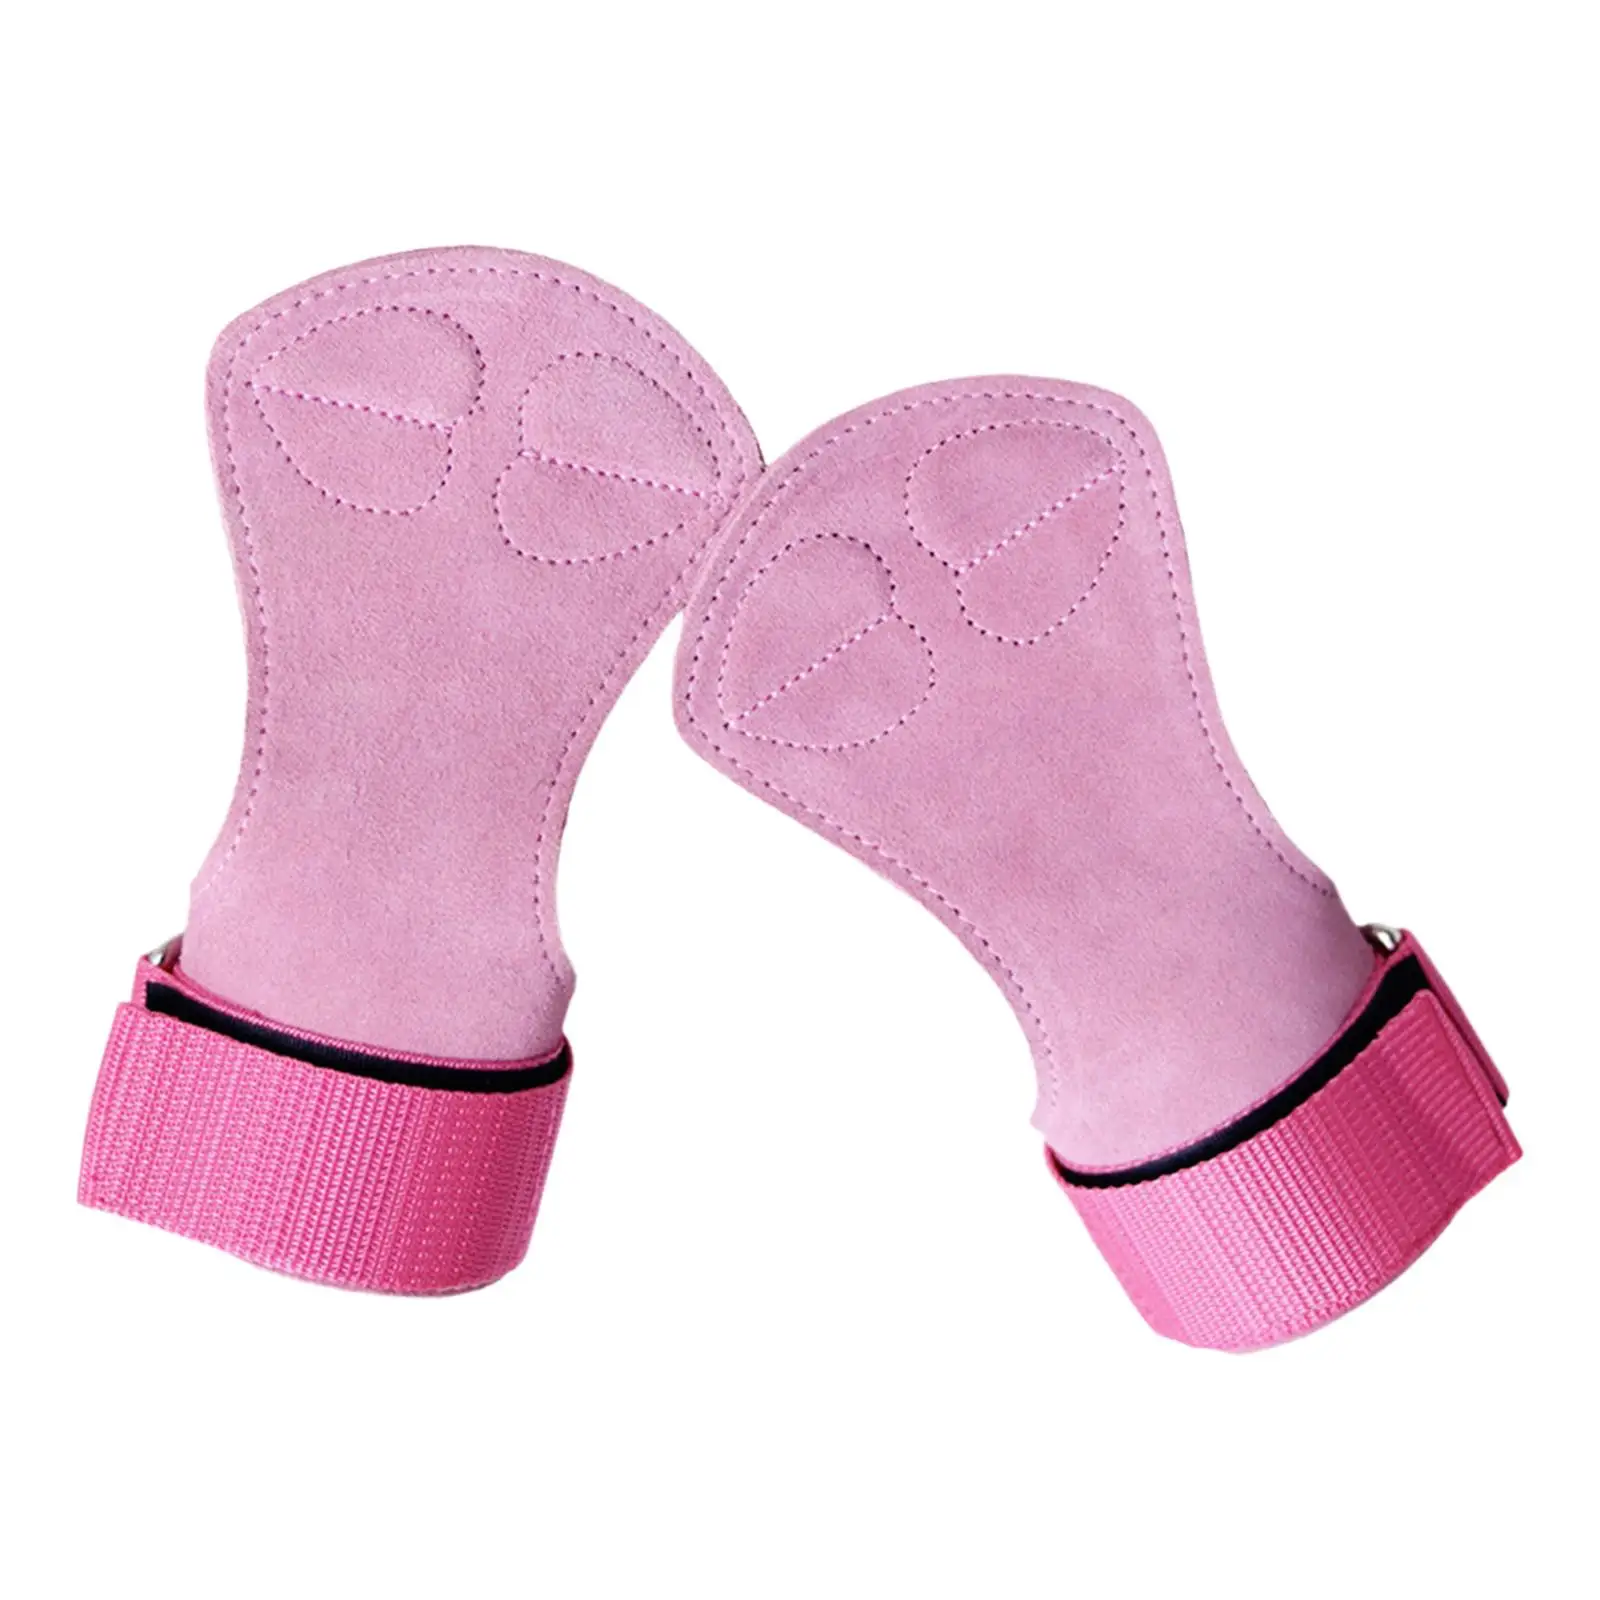 Weight Lifting Gloves Powerlifting Workout Gloves Lifting Pads for 